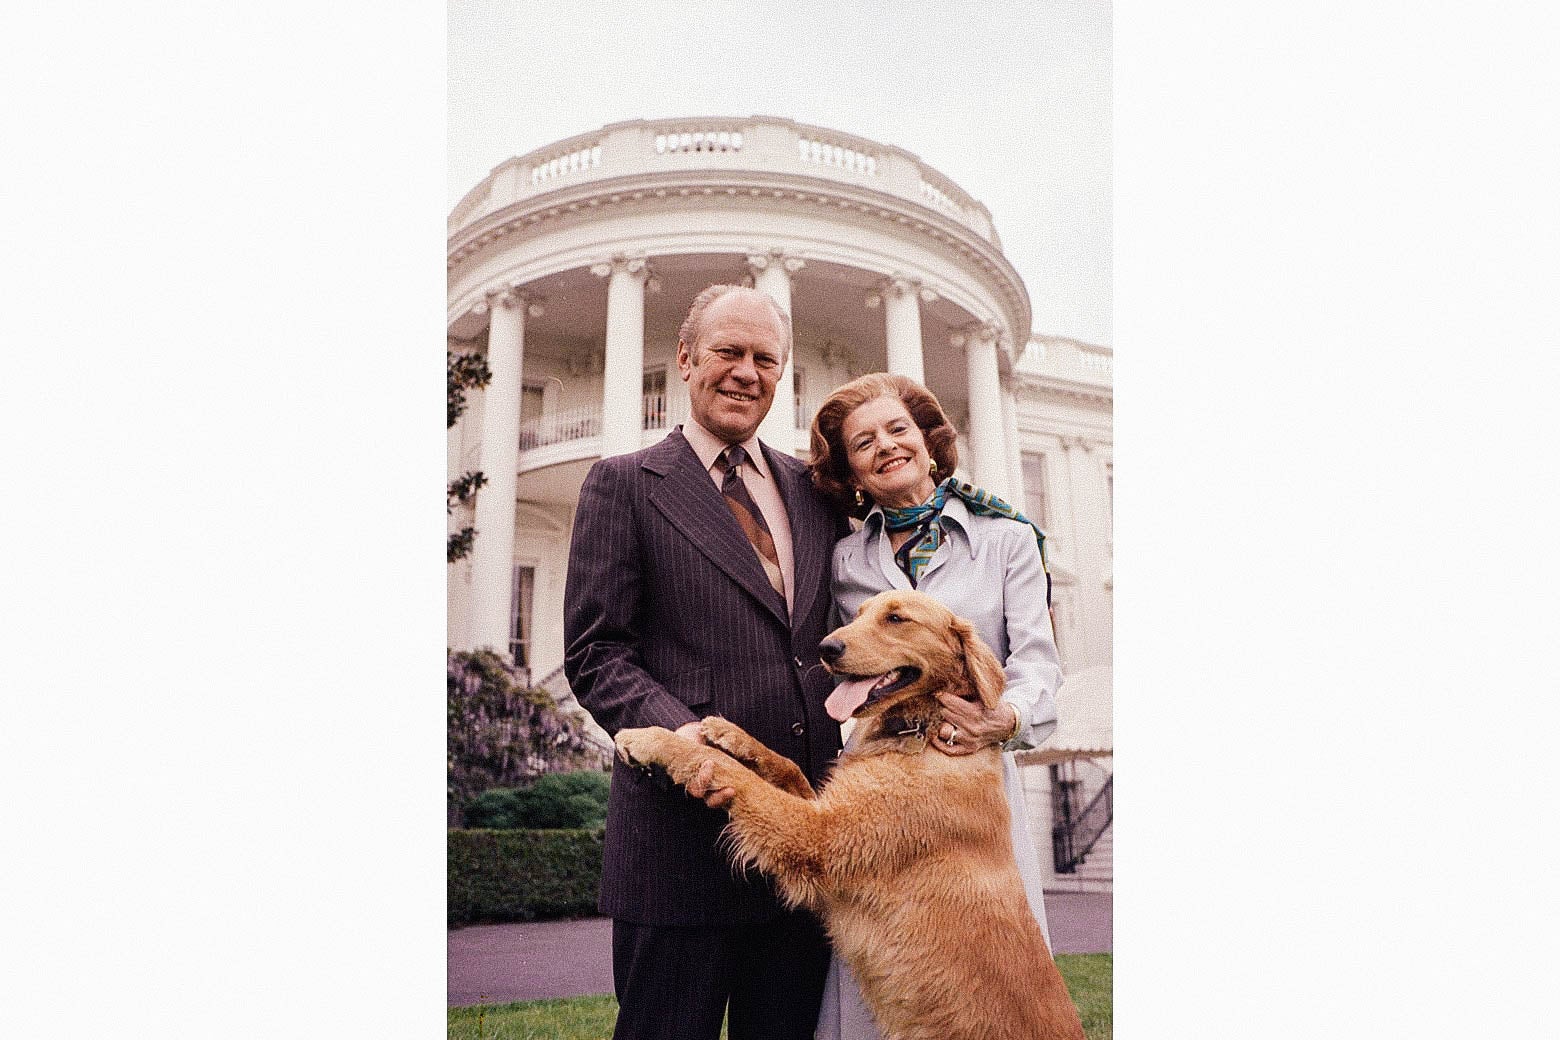 Gerald and Betty Ford stand on the White House lawn with their golden retriever.